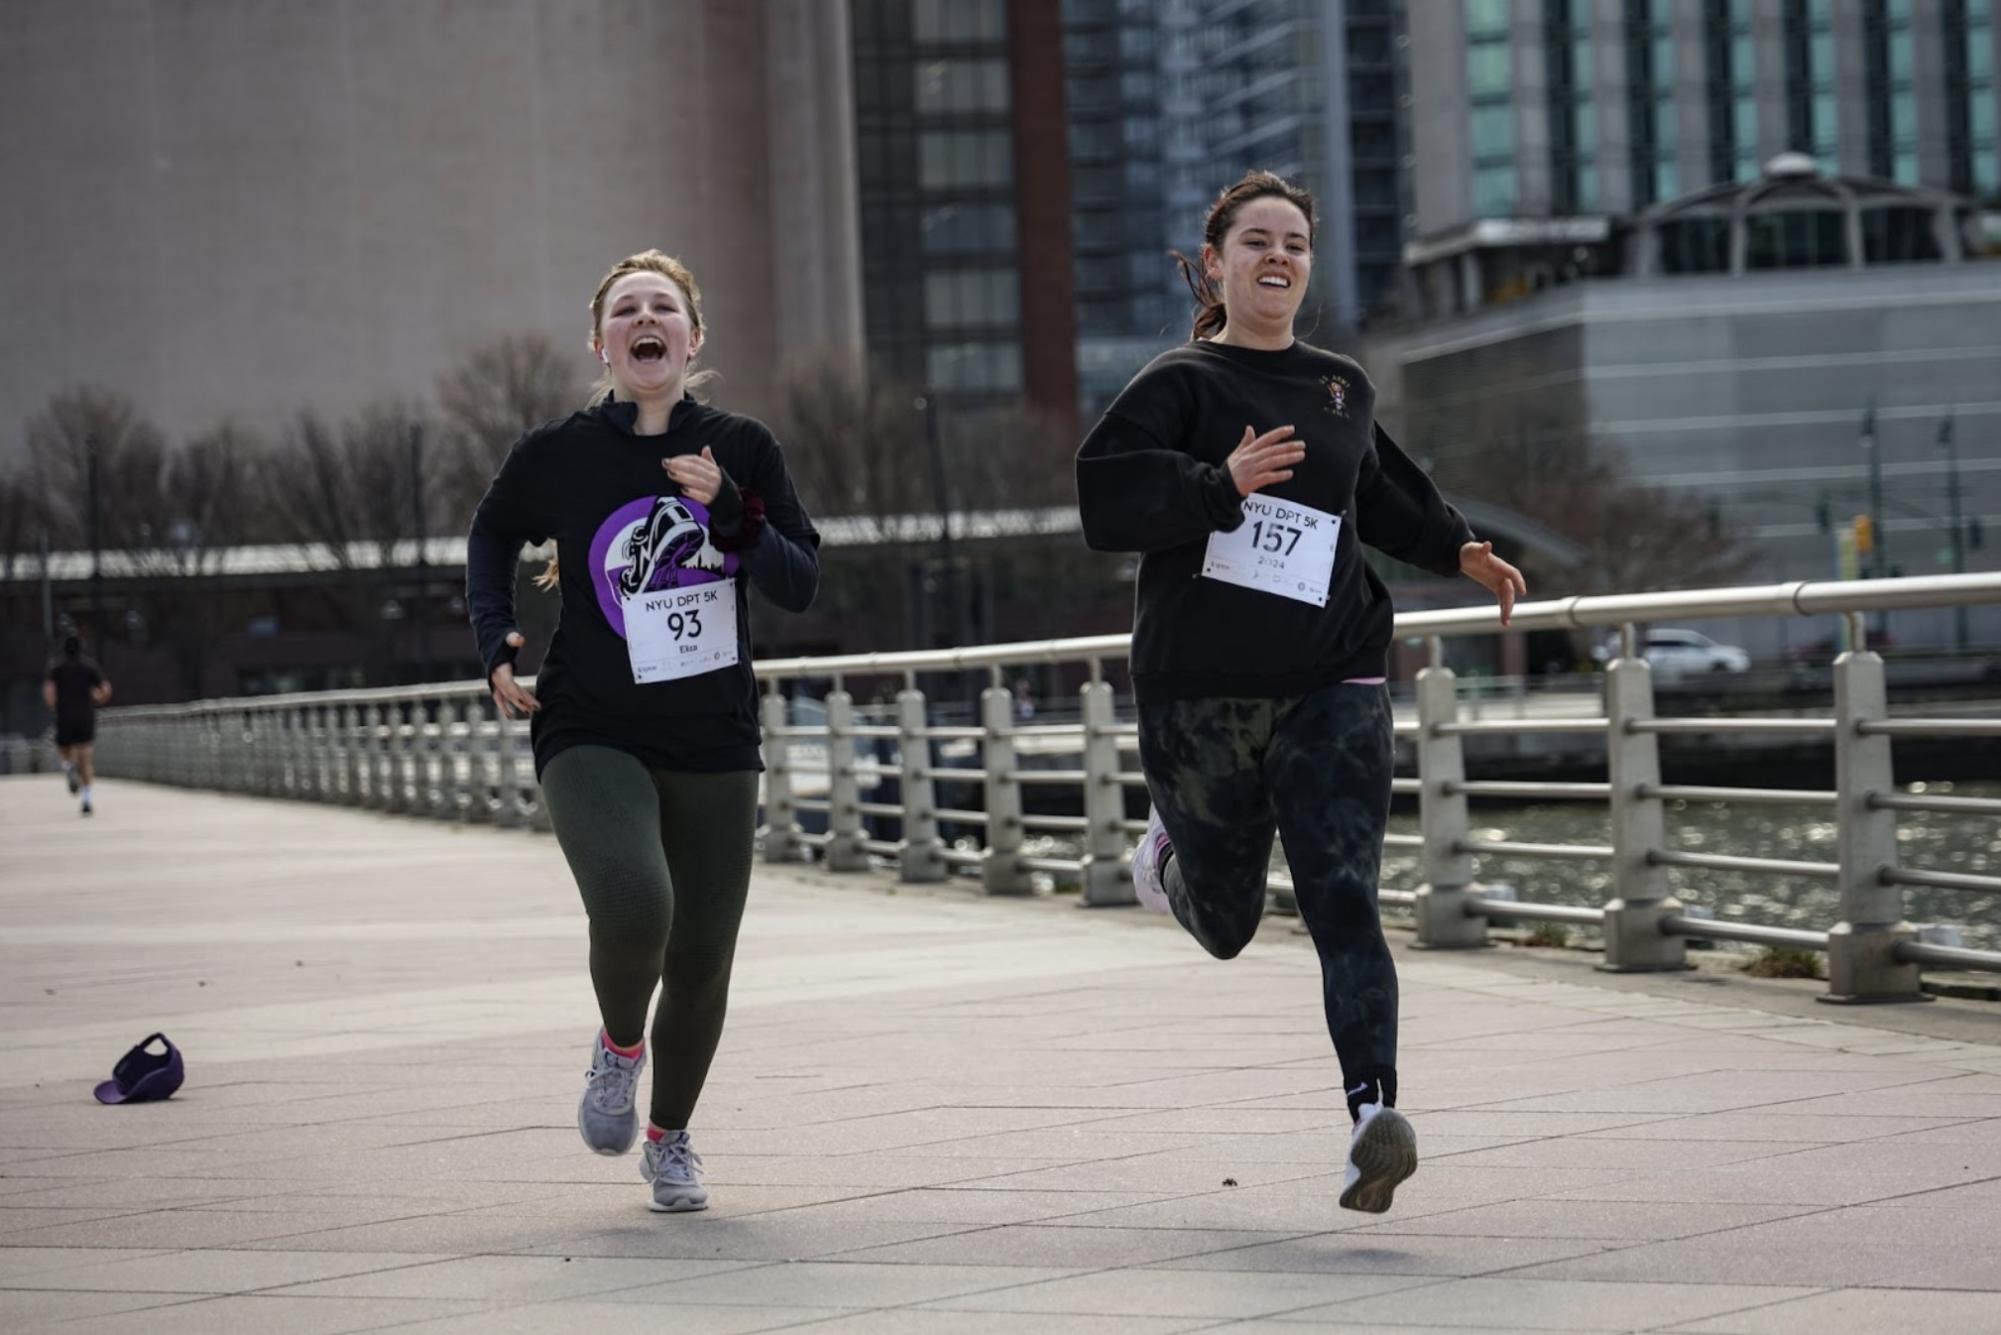 Two women with running bibs pinned to their shirts run on a bridge.